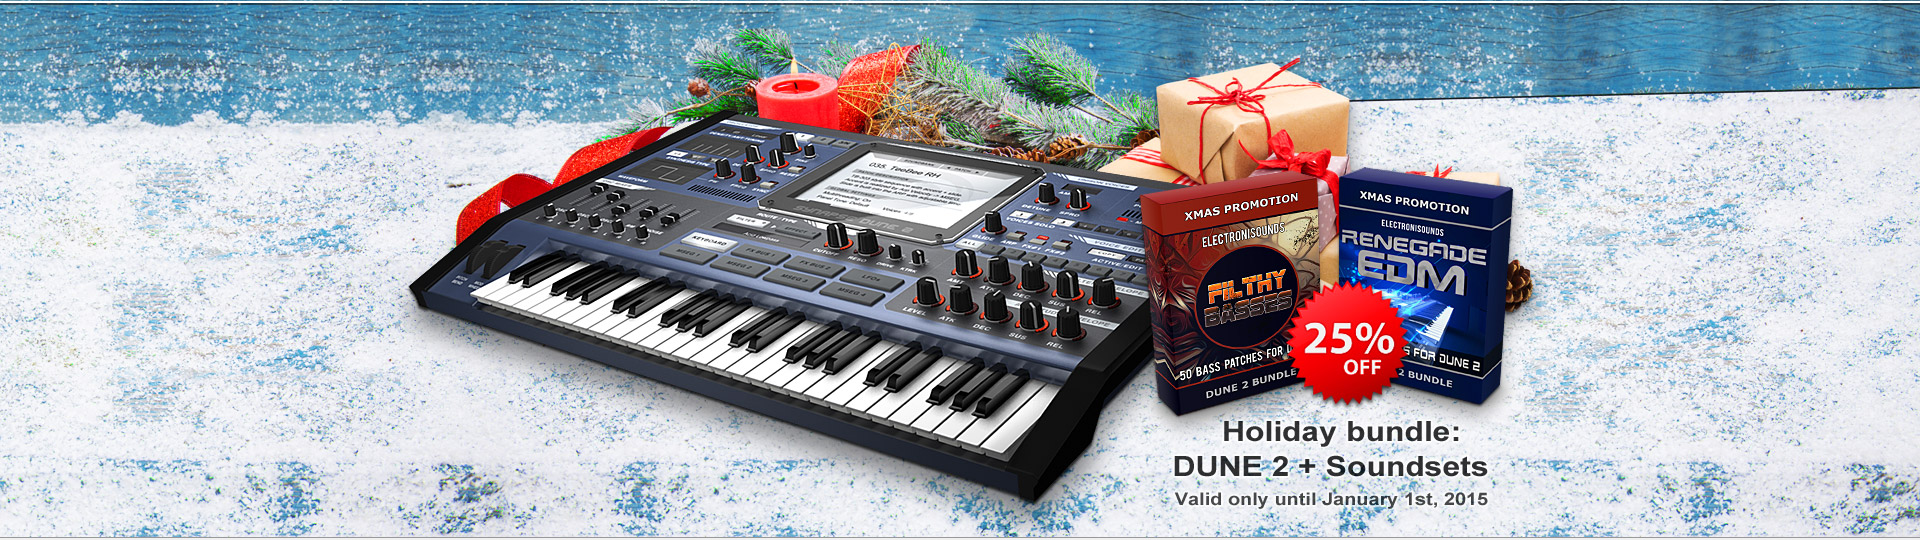 How To Get Dune 2 Vst Free